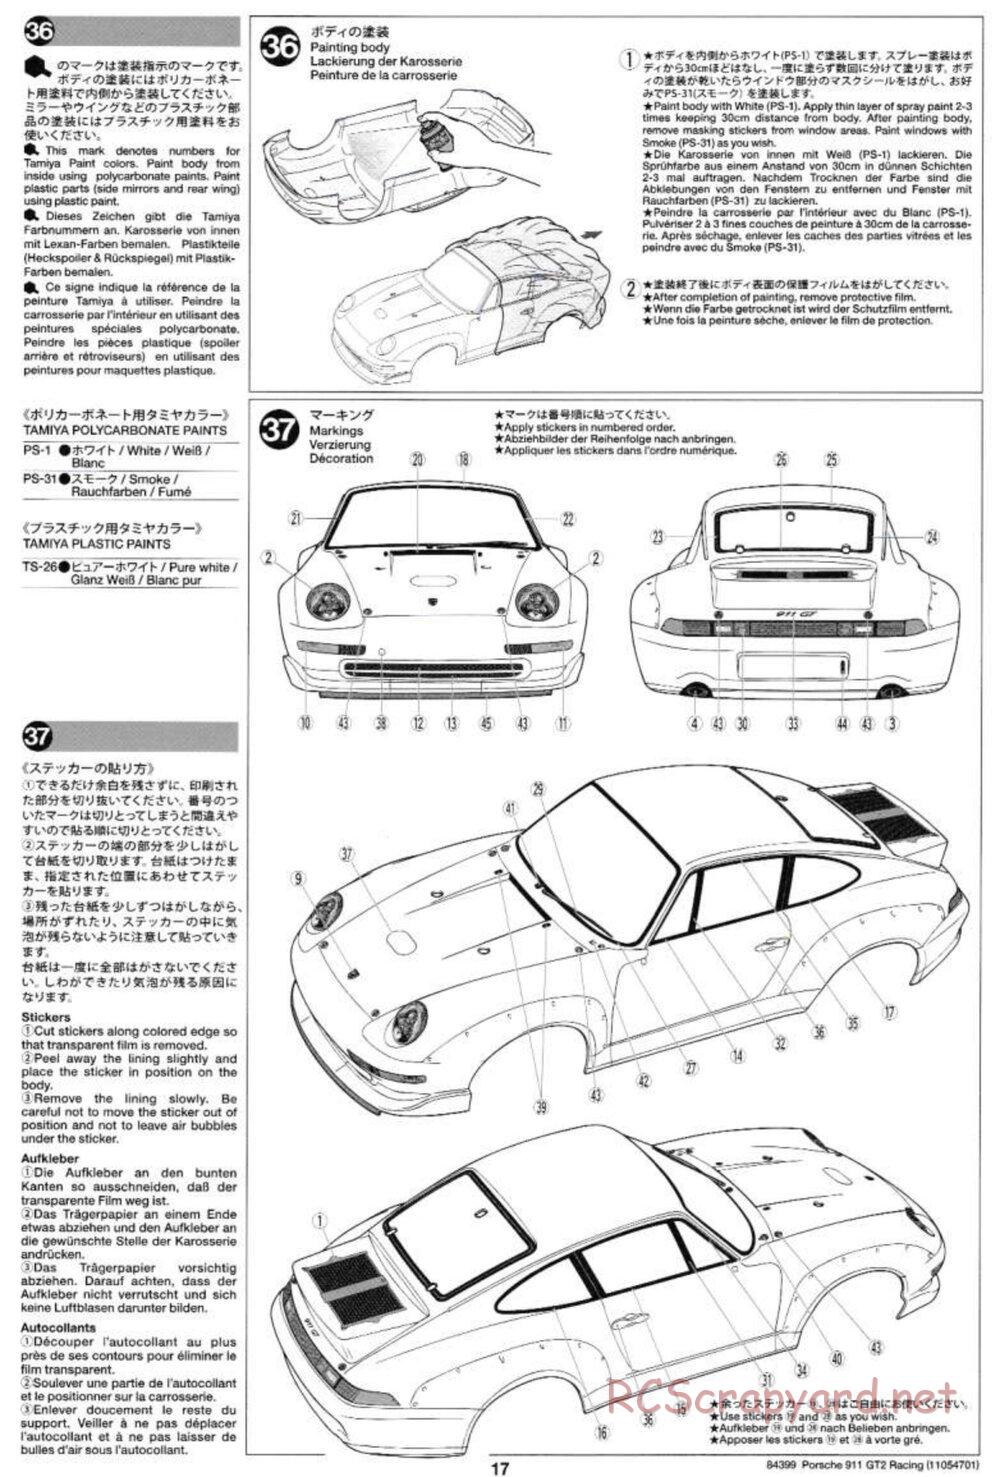 Tamiya - Porsche 911 GT2 Racing - TA-02SW Chassis - Manual - Page 17